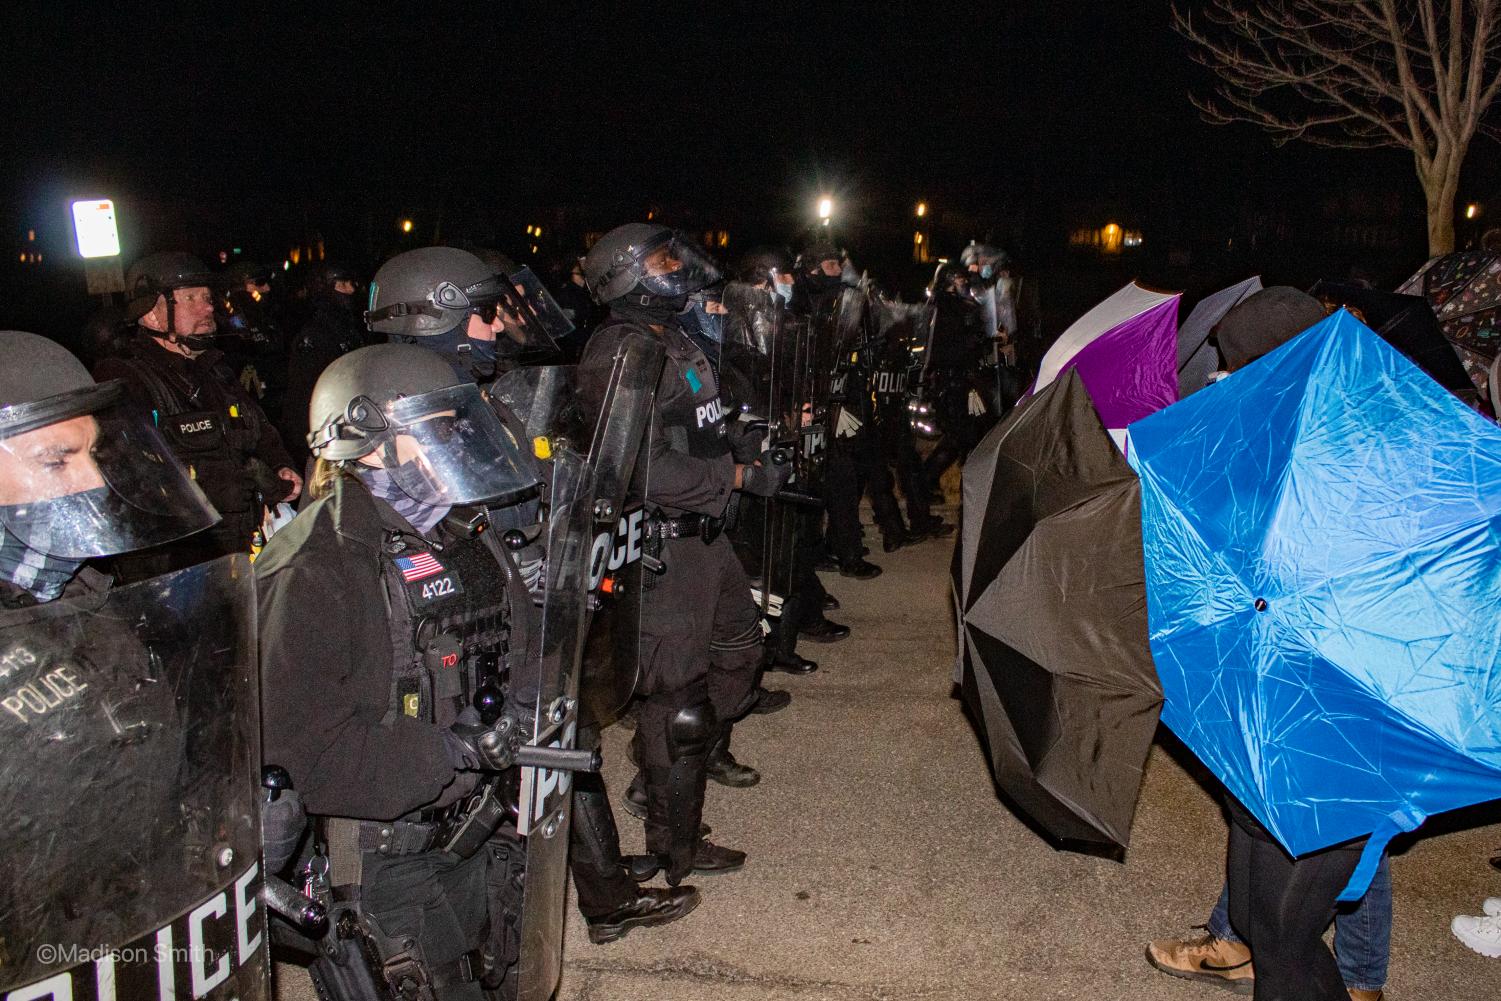 A+line+of+police%2C+fully+armed+in+riot+gear%2C+faces+off+with+protesters+who+are+protecting+their+faces+with+umbrellas.